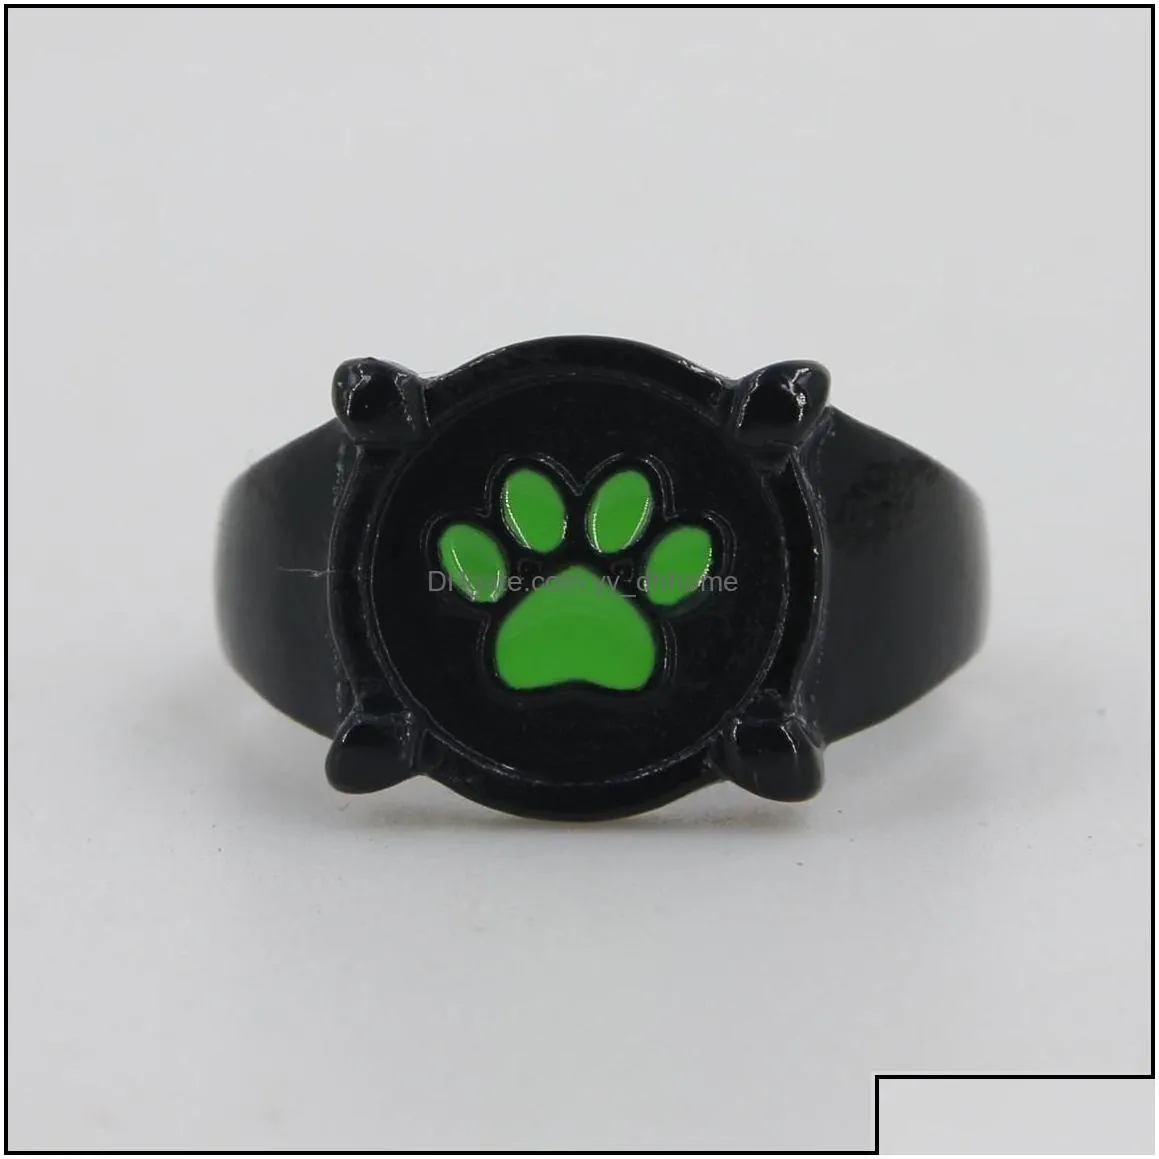 band rings cartoon black cat claw ring girl boy green enamel love paw print cute jewelry kid punk birthday gift drop delivery yydhhome